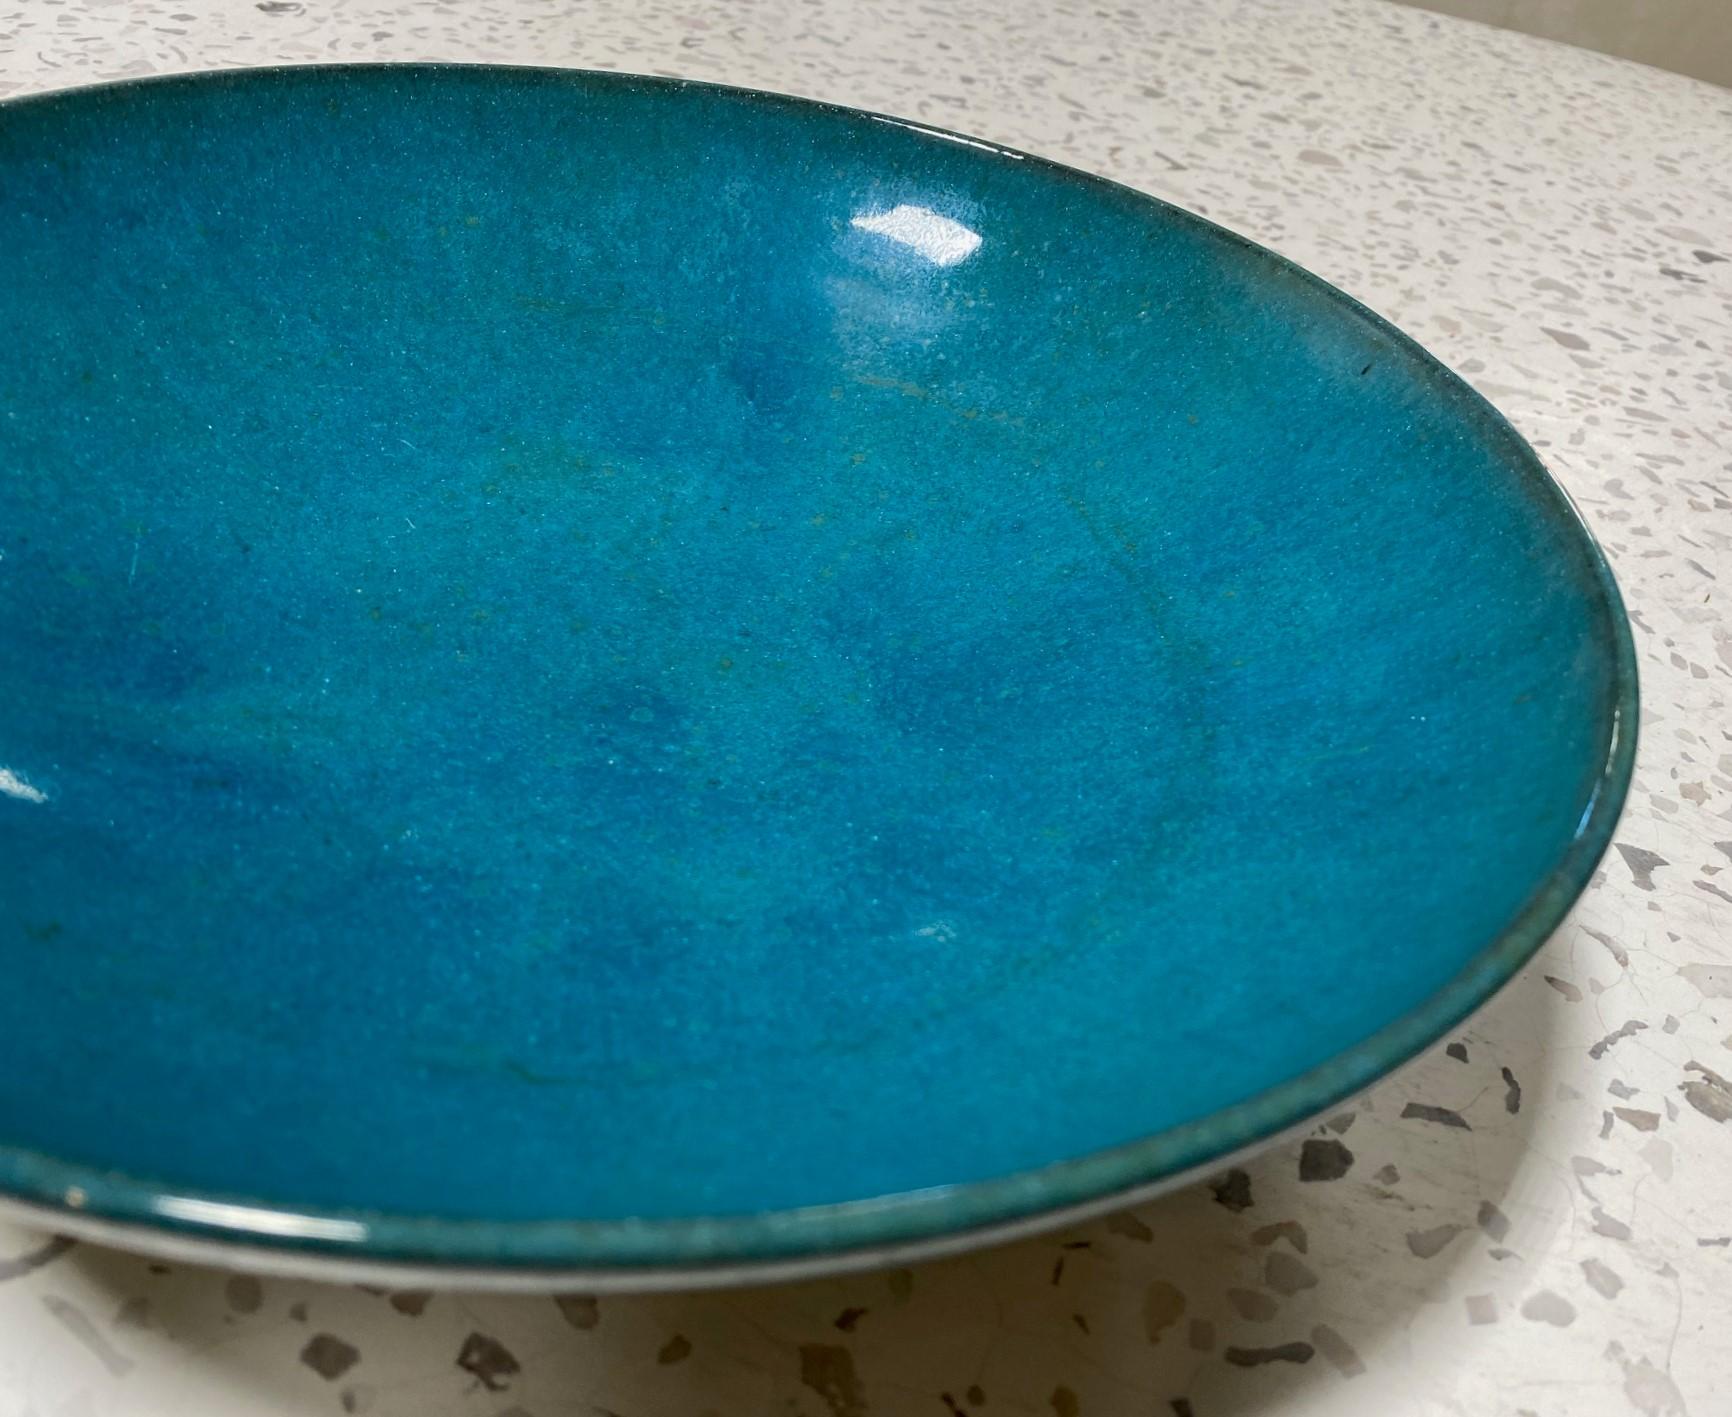 Paul Ami Bonifas Signed Large Early Midcentury Swiss Studio Pottery Art Bowl In Good Condition For Sale In Studio City, CA